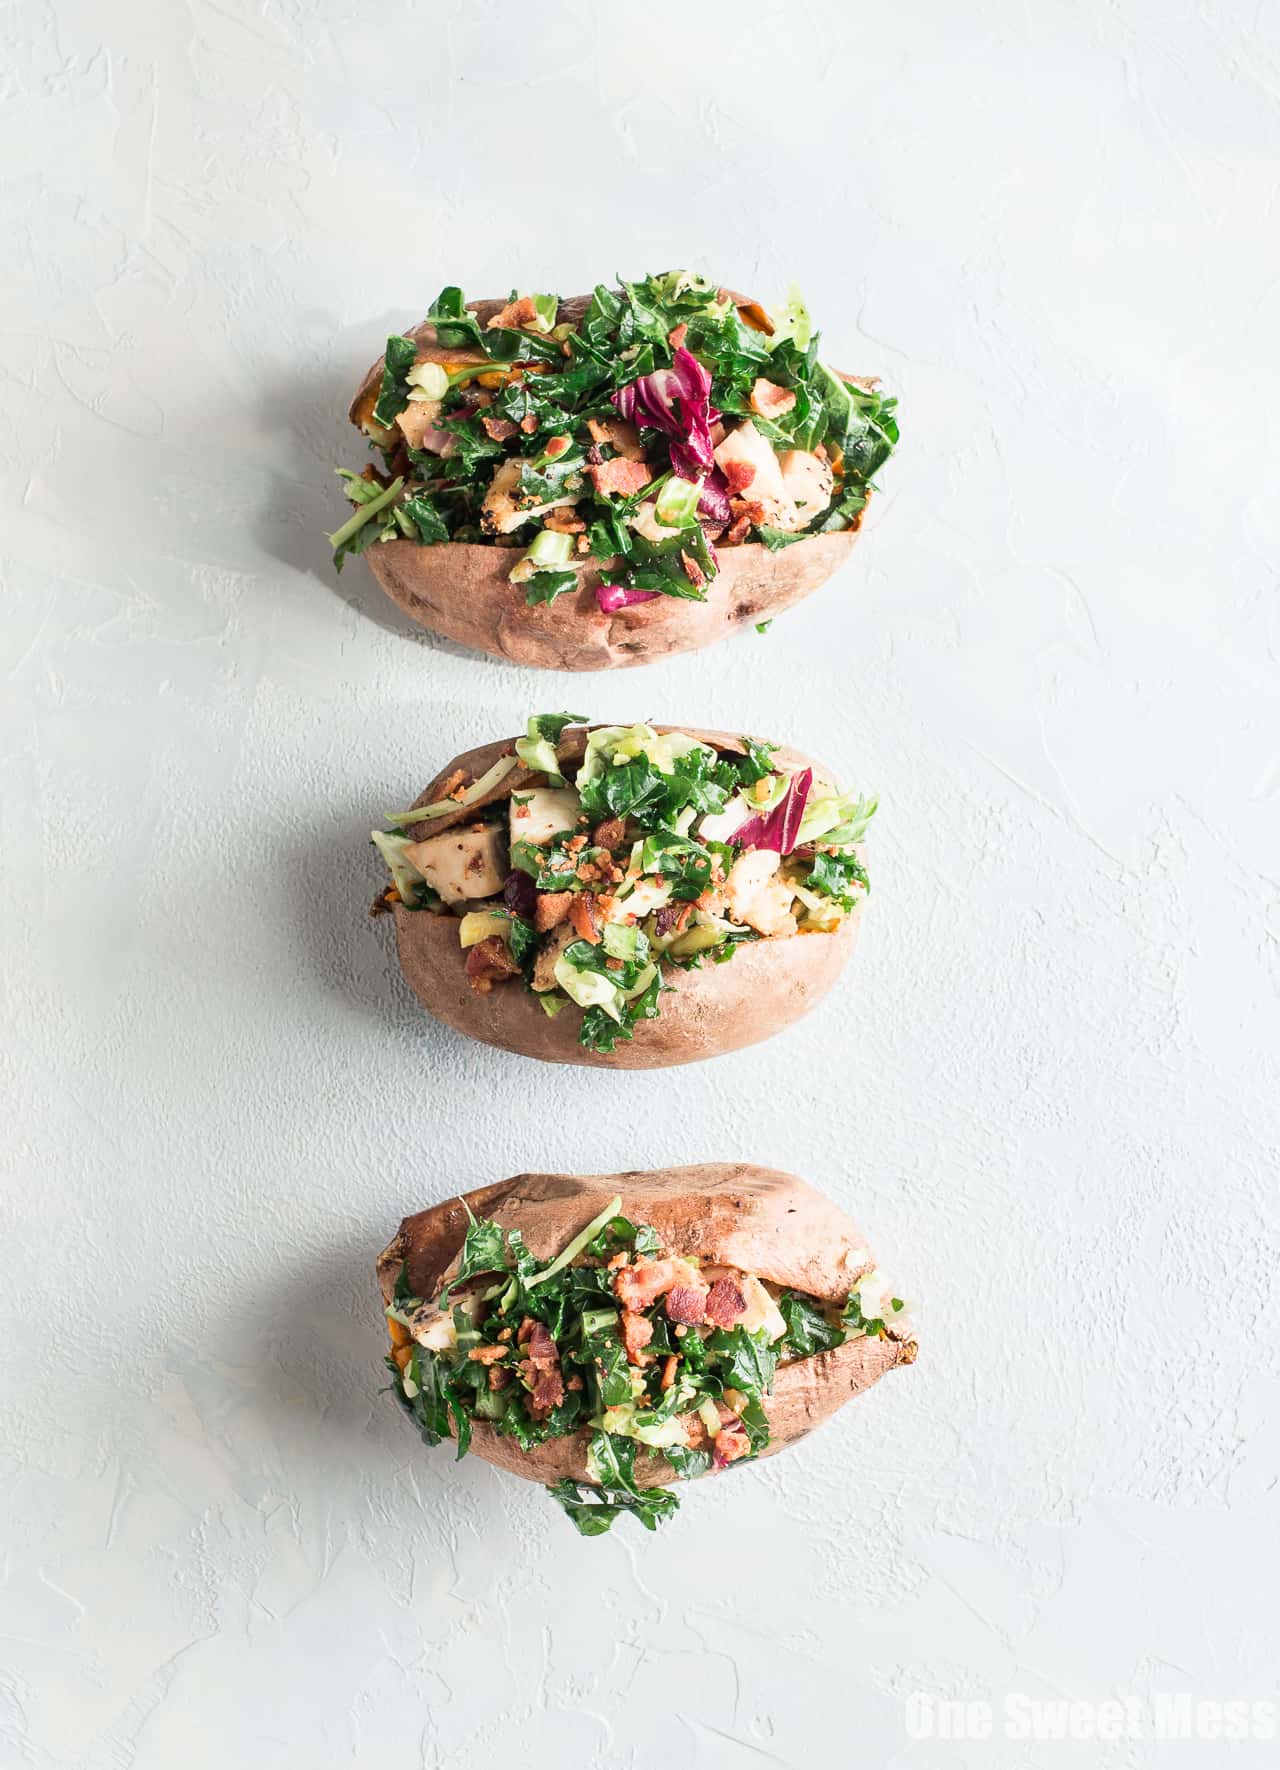 Grilled Chicken & Sweet Kale Salad Stuffed Sweet Potatoes: Loaded with grilled poppy seed dressing glazed chicken and topped with sweet kale salad tossed in warm bacon vinaigrette. Hearty, healthy and gluten-free.